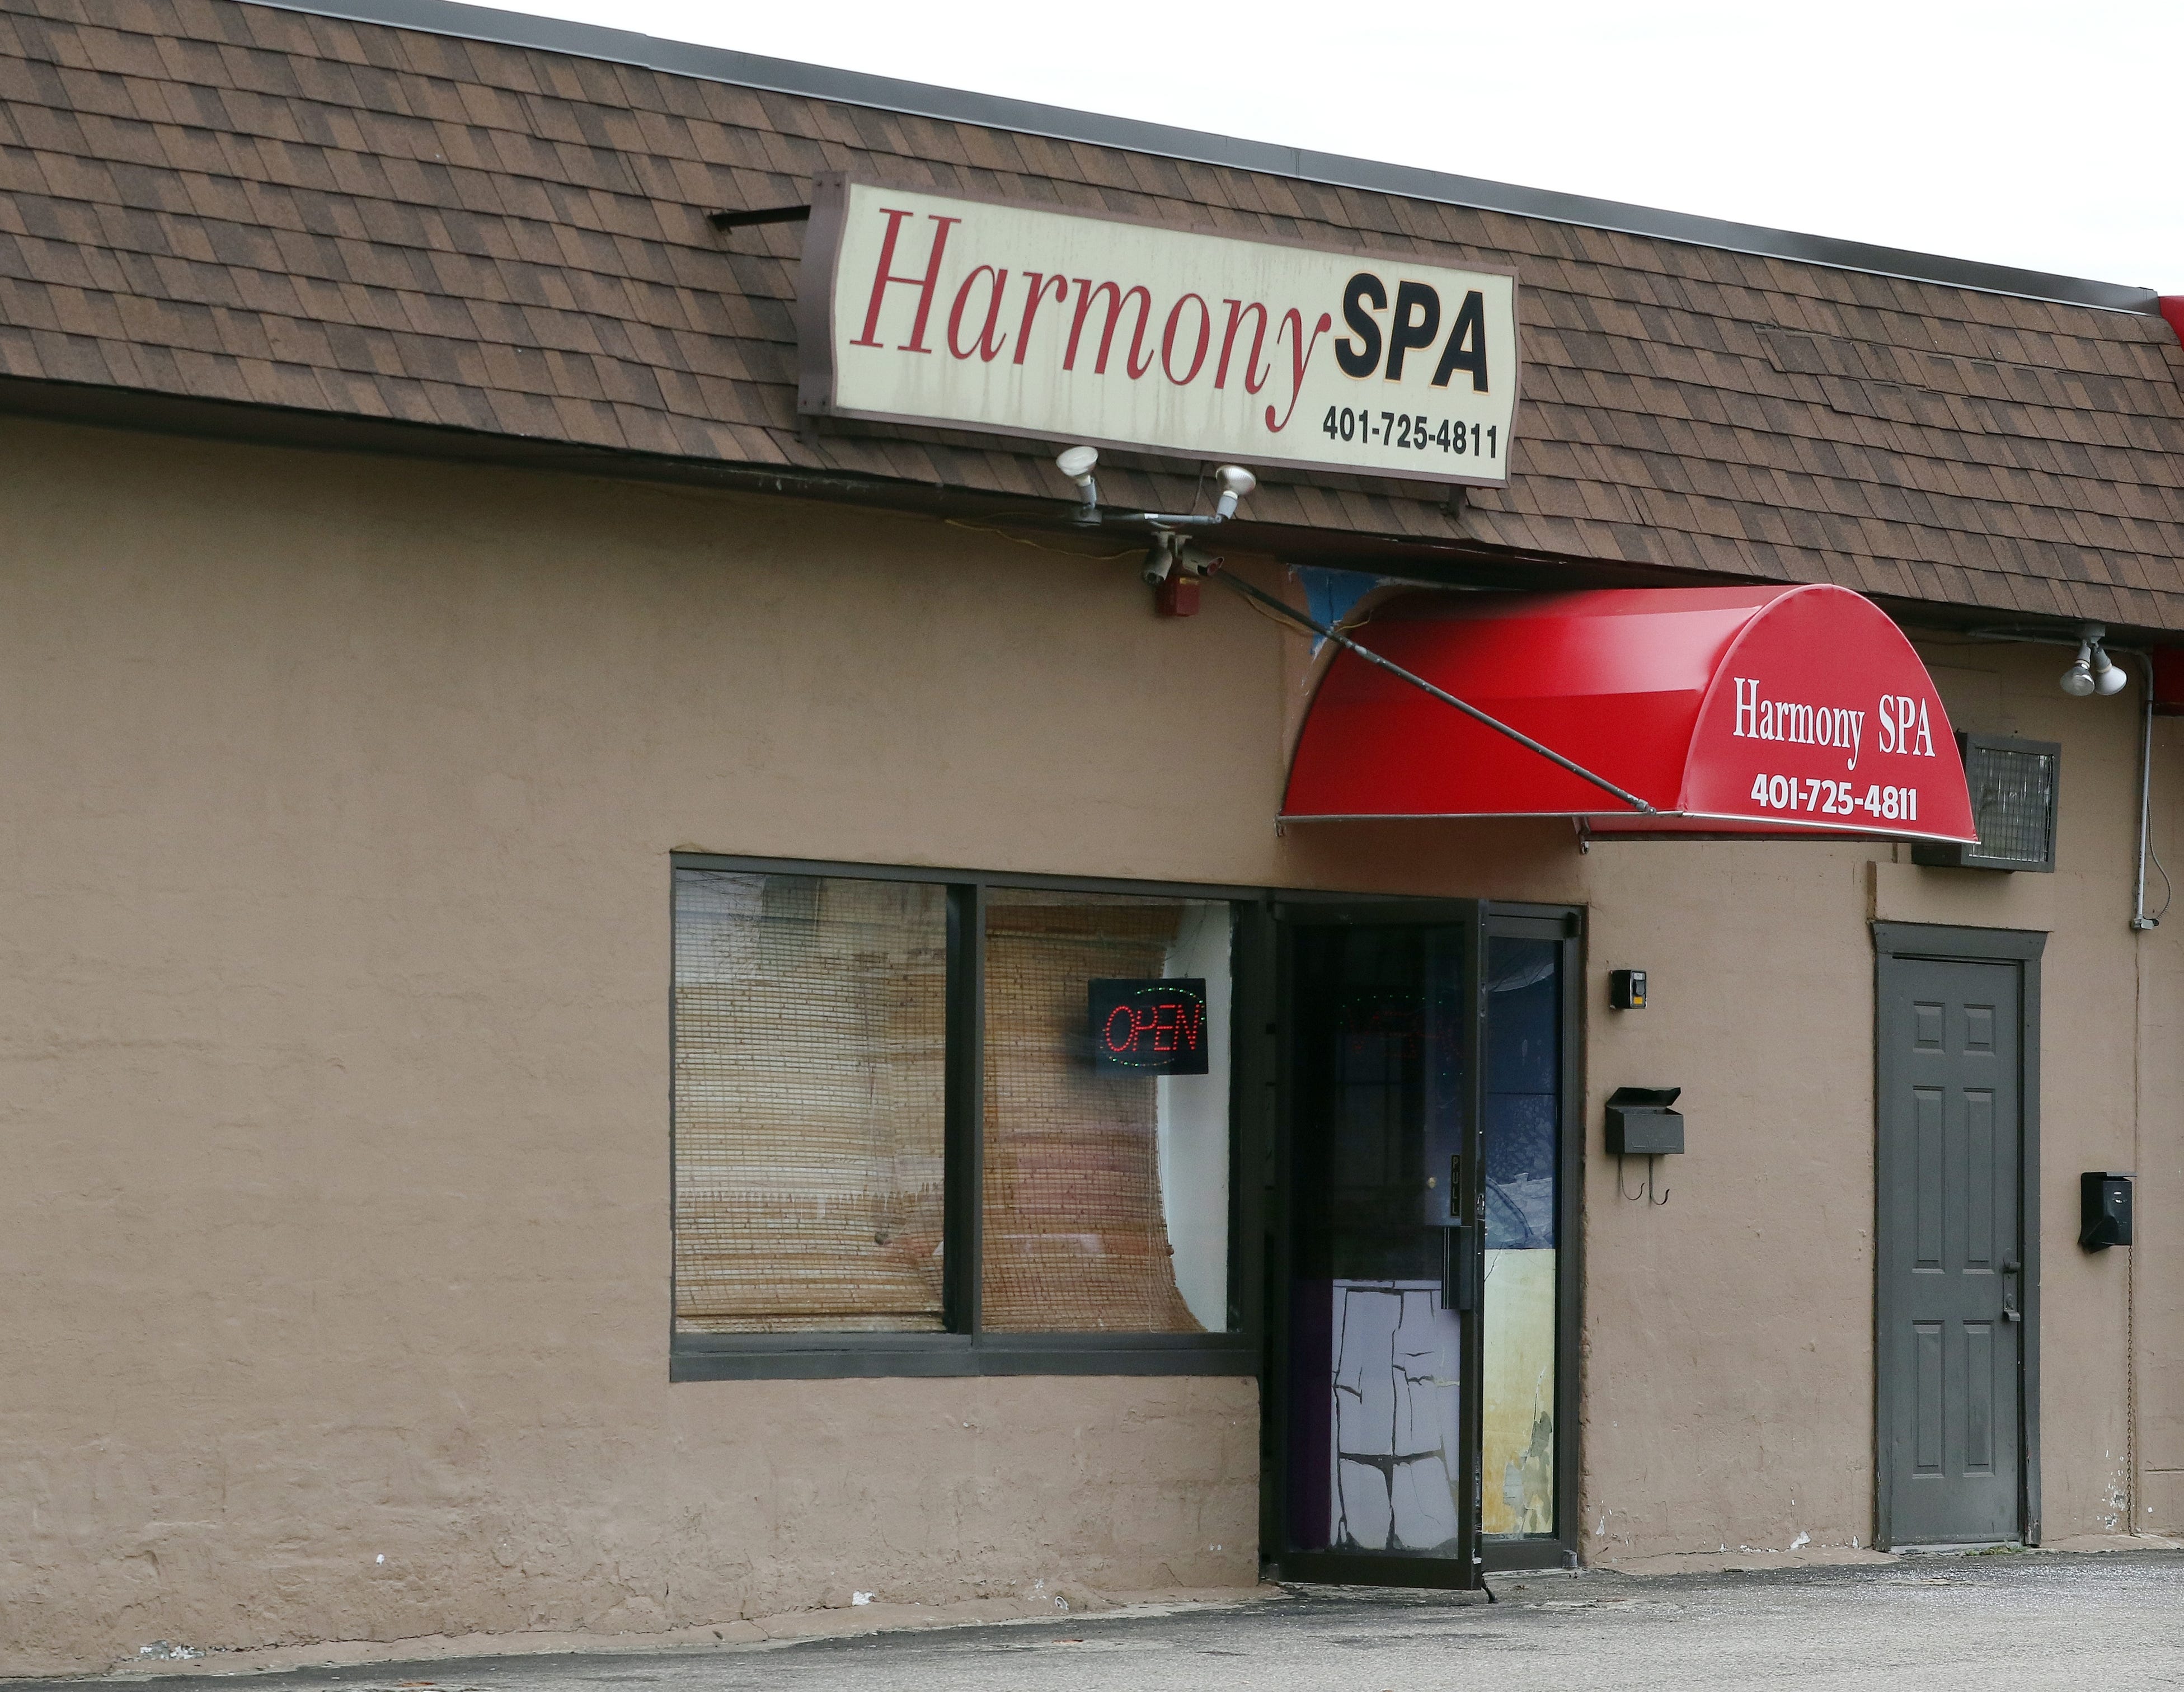 13 arrested in prostitution raid at massage parlors